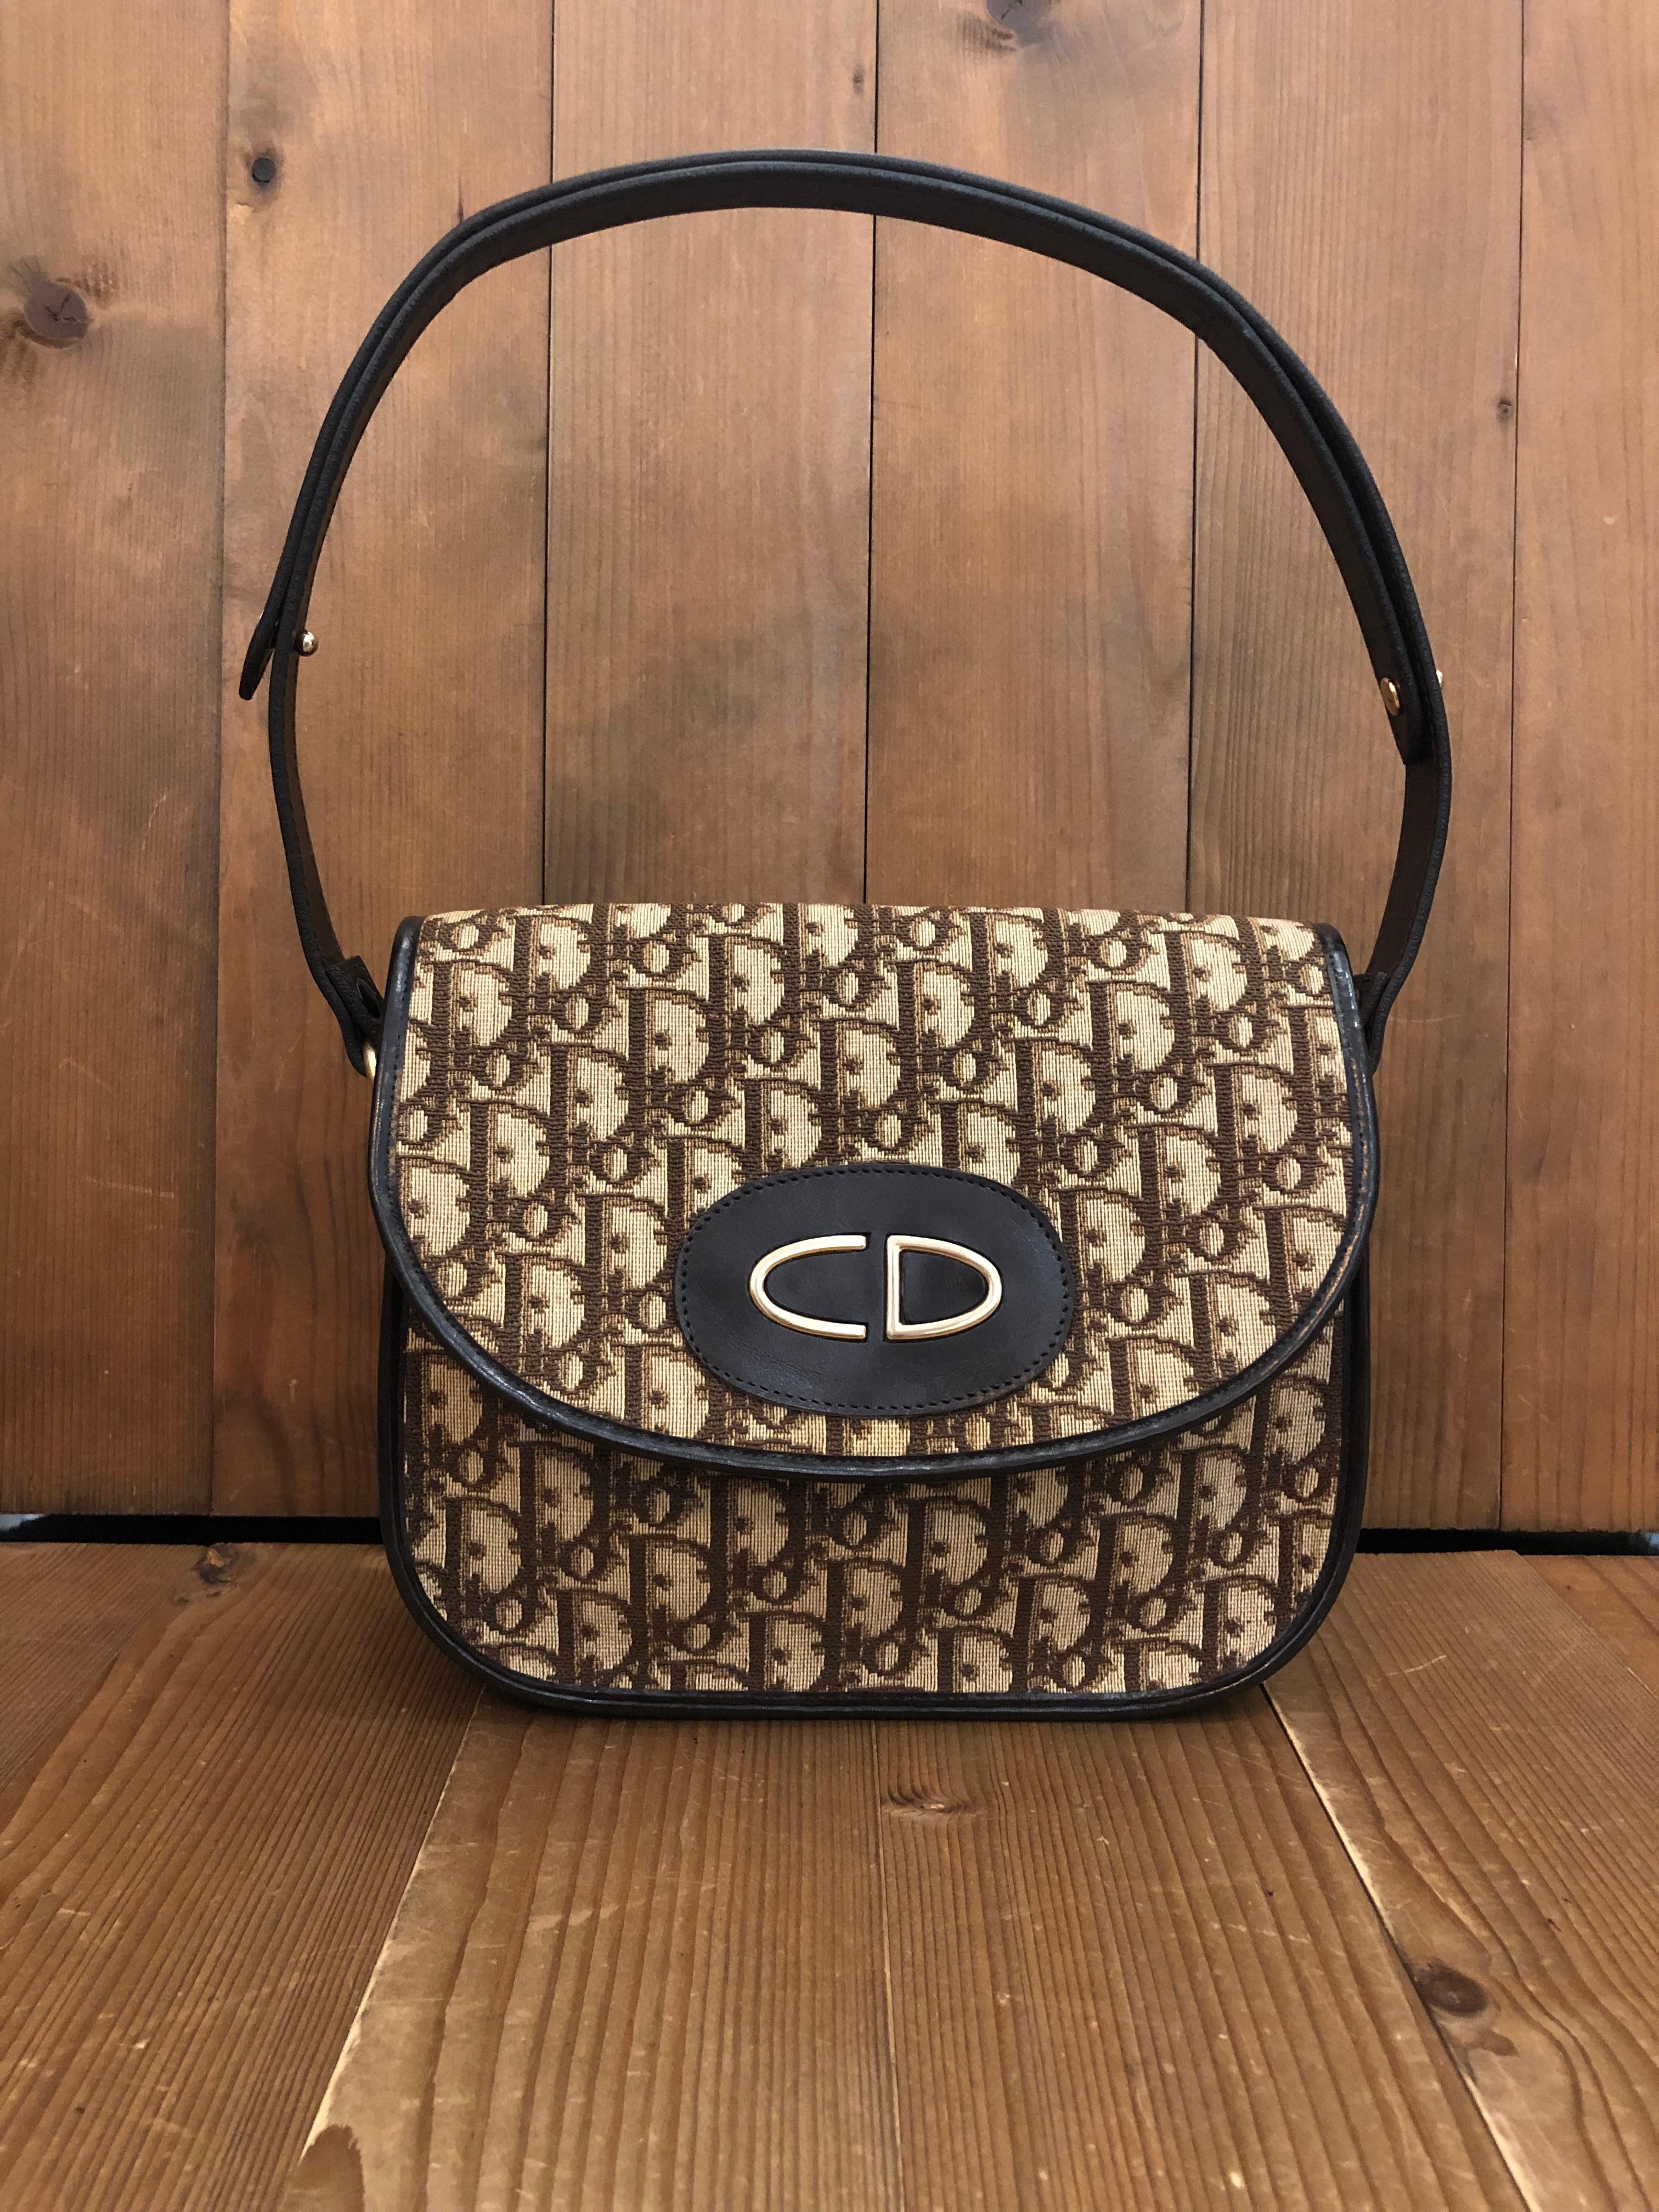 1970s Christian Dior shoulder bag in brown trotter jacquard and leather. Front snap fastening closure opens to a coated interior in brown. Made in France. Measures approximately 9 x 6.5 x 2.75 inches Strap drop 14 inches at its longest. 

Condition